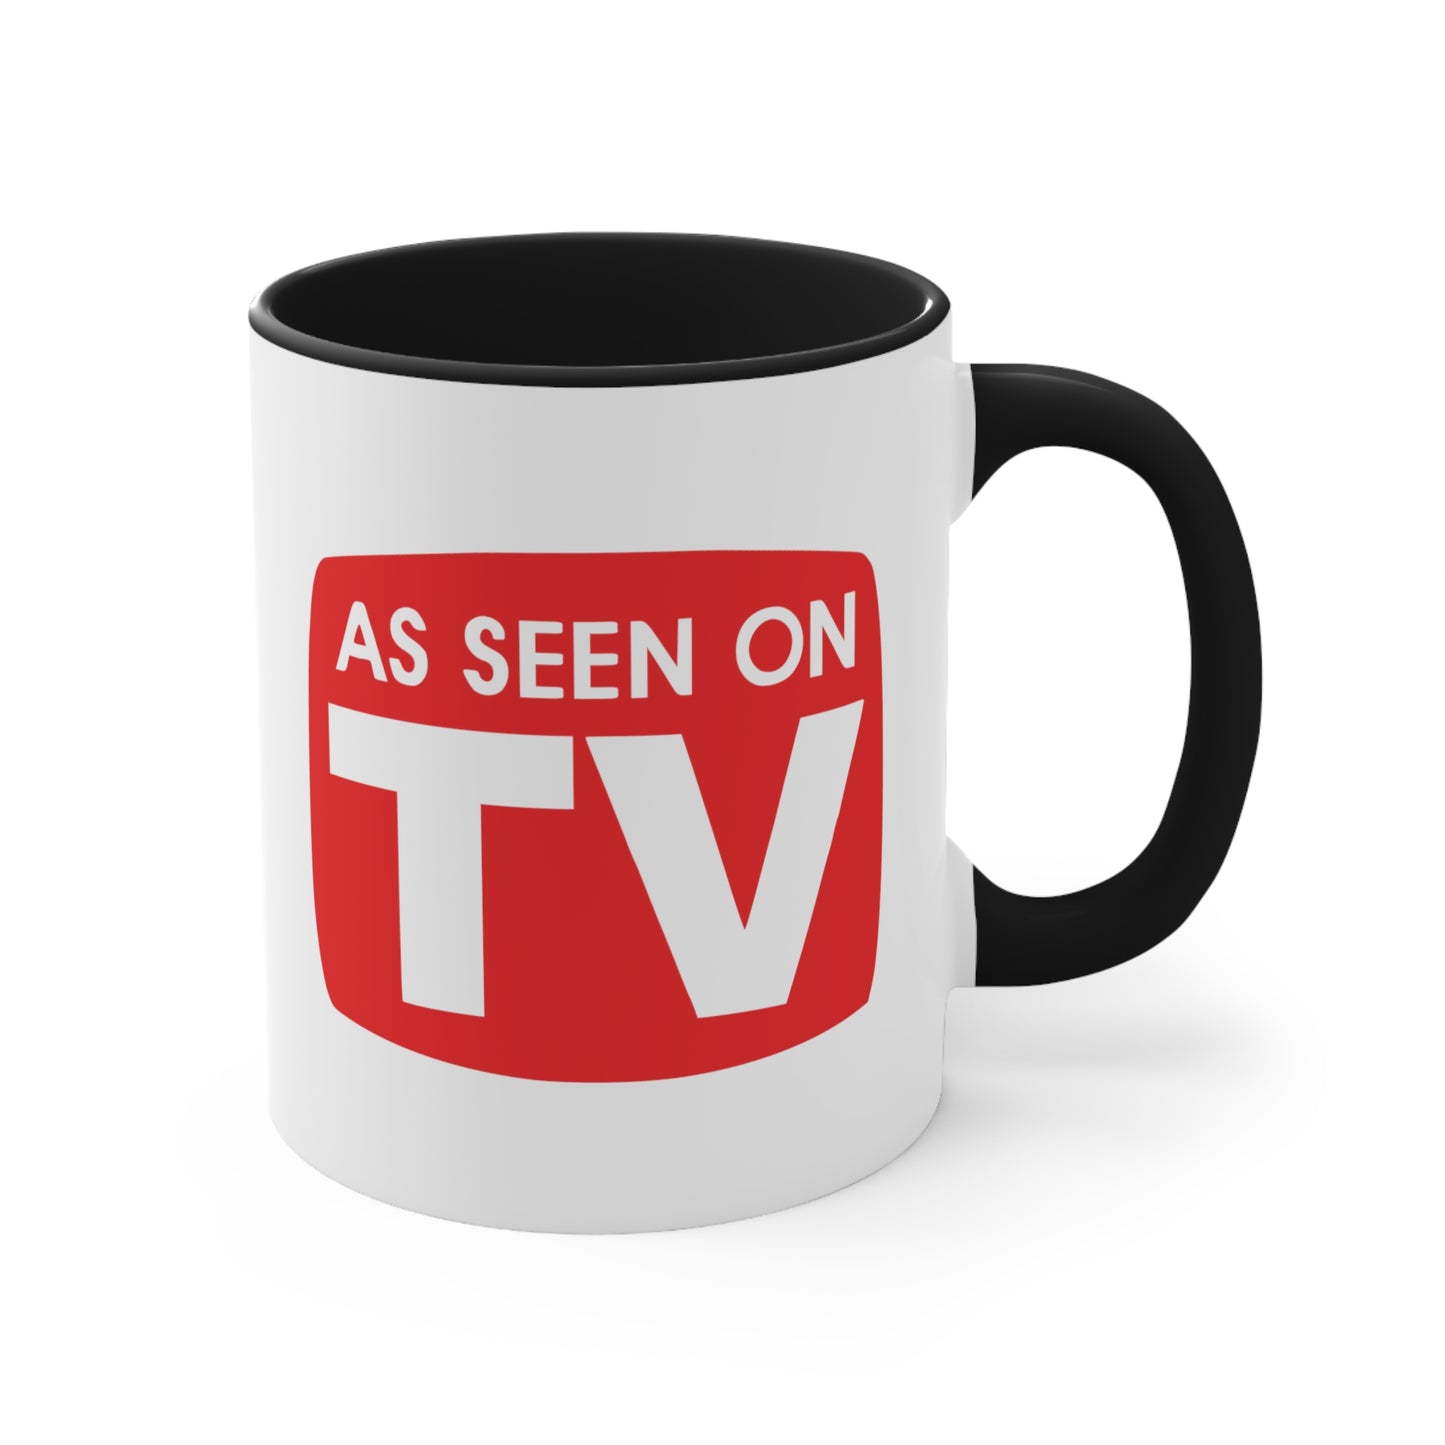 As Seen on TV Coffee Mug - Double Sided Black Accent White Ceramic 11oz by TheGlassyLass.com